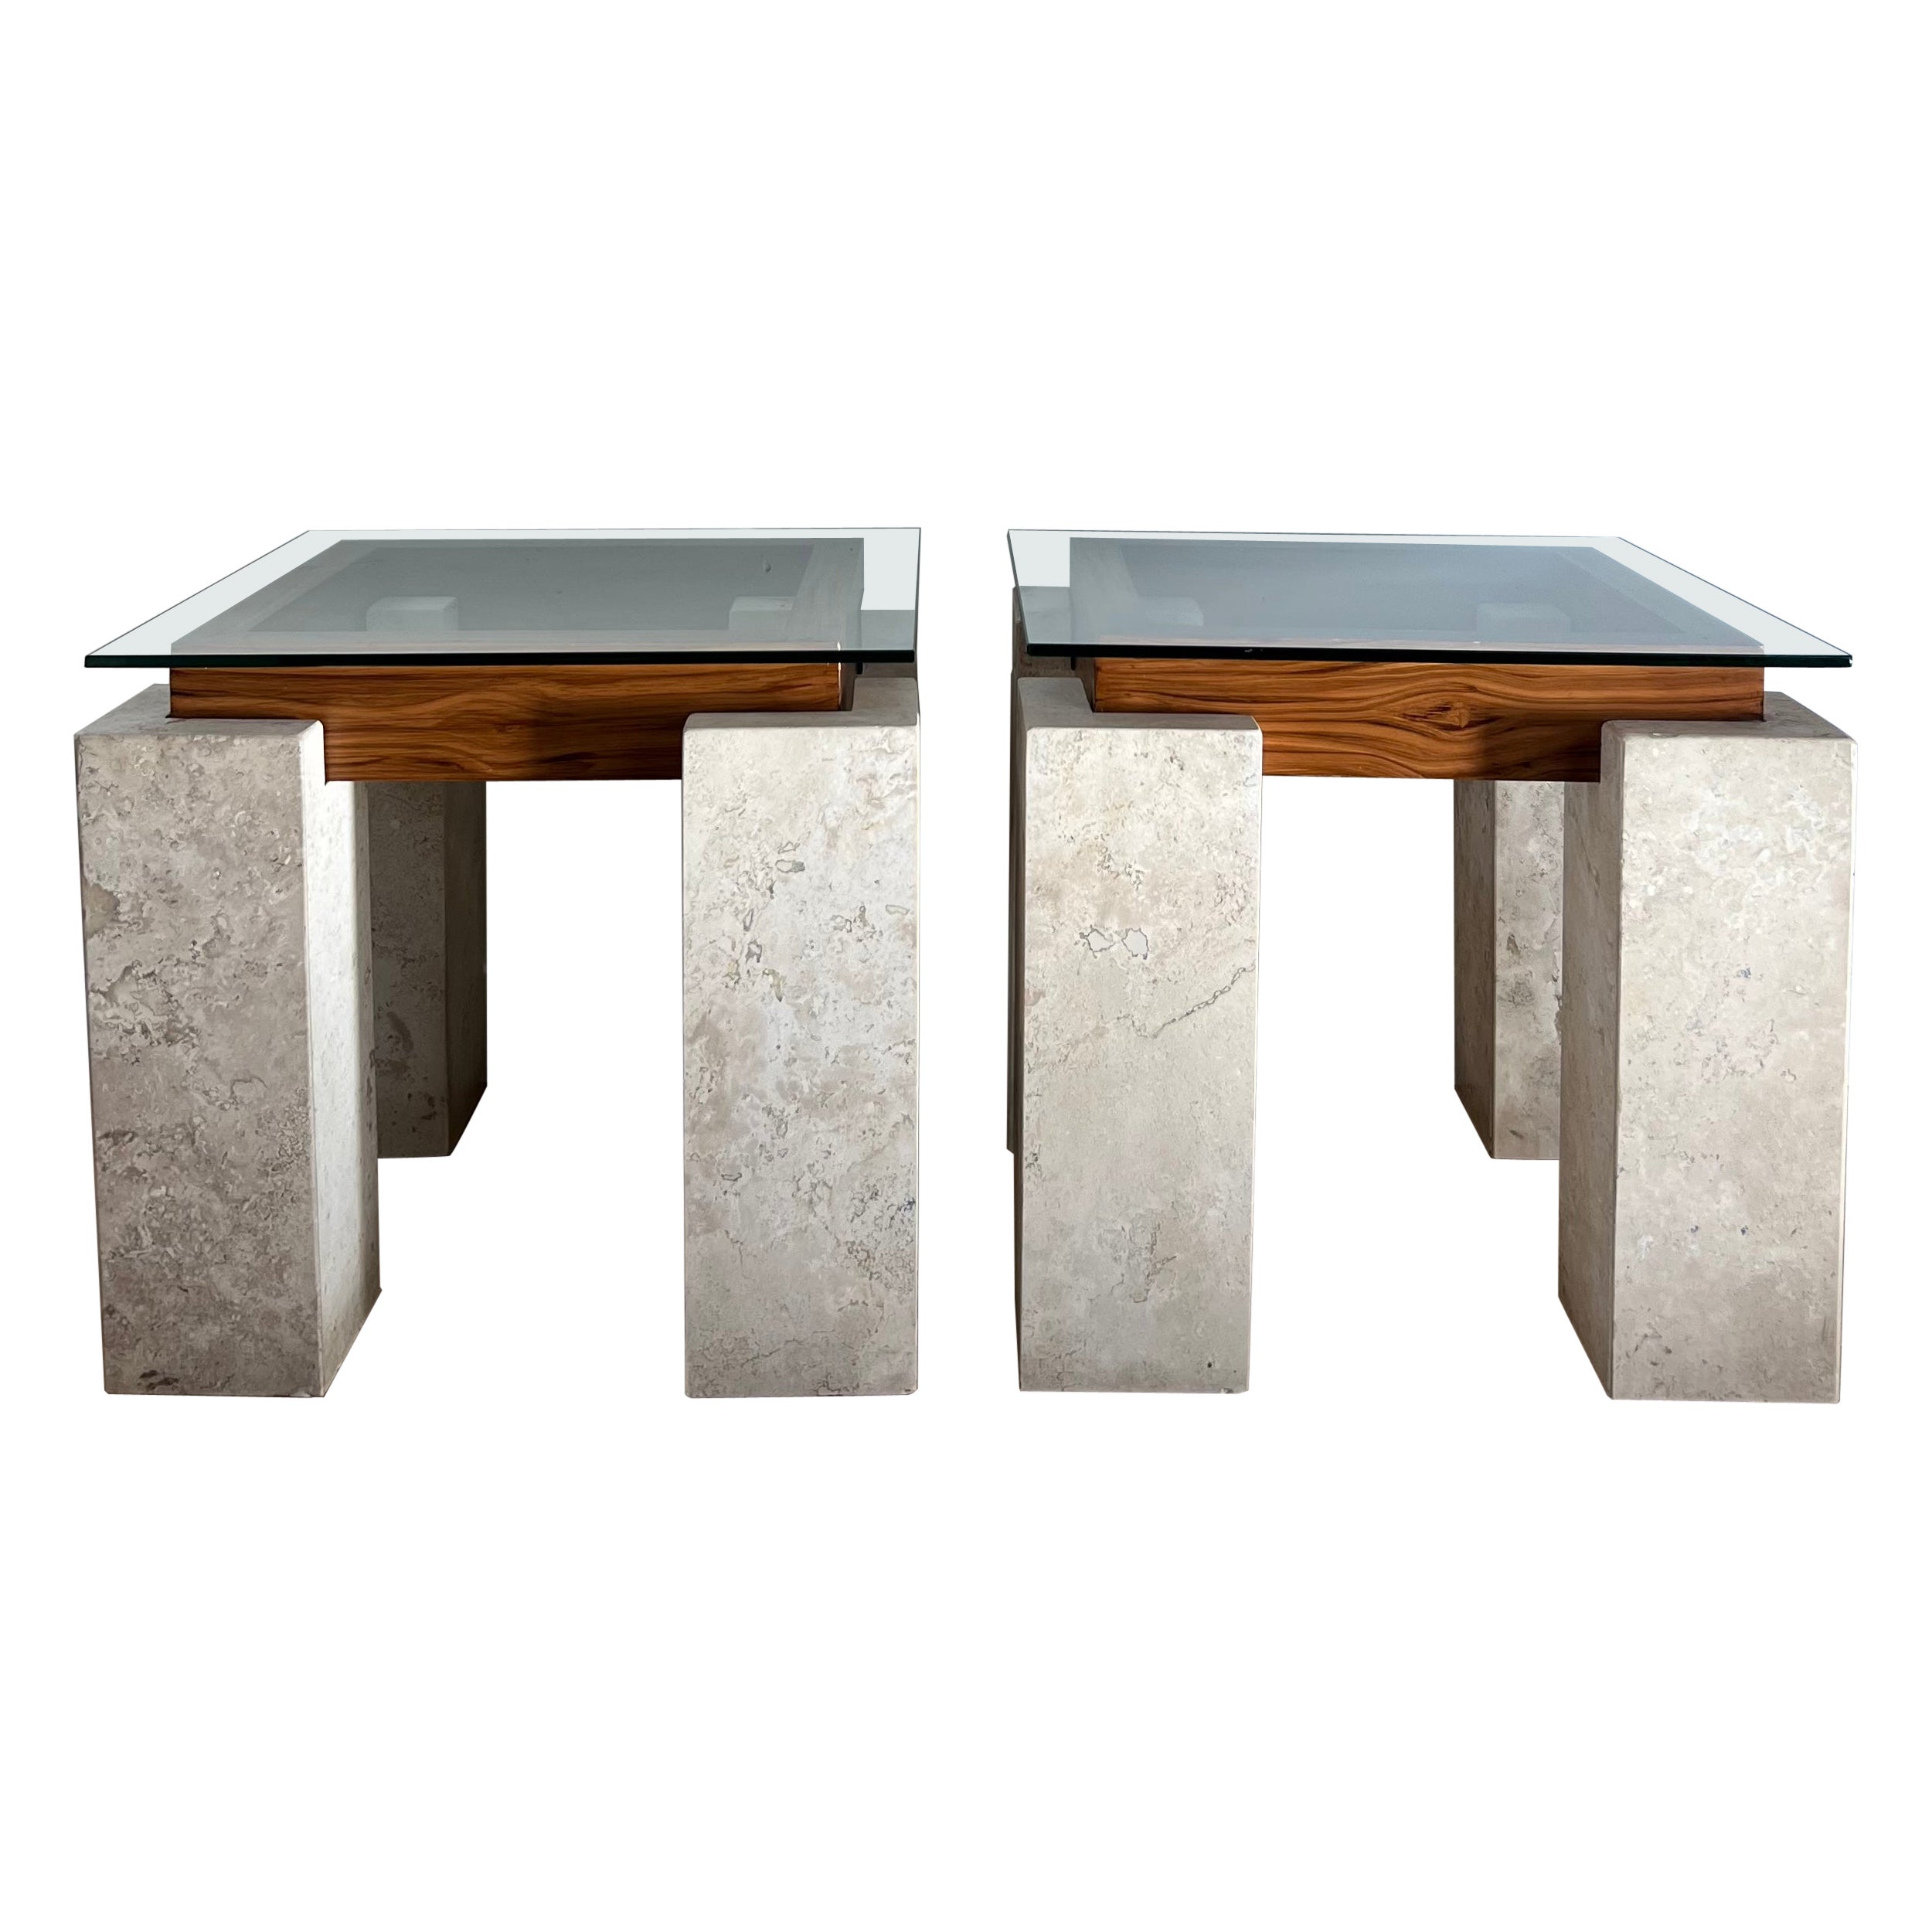 Pair of Marble, Wood, and Glass Tables, circa Late 1970s